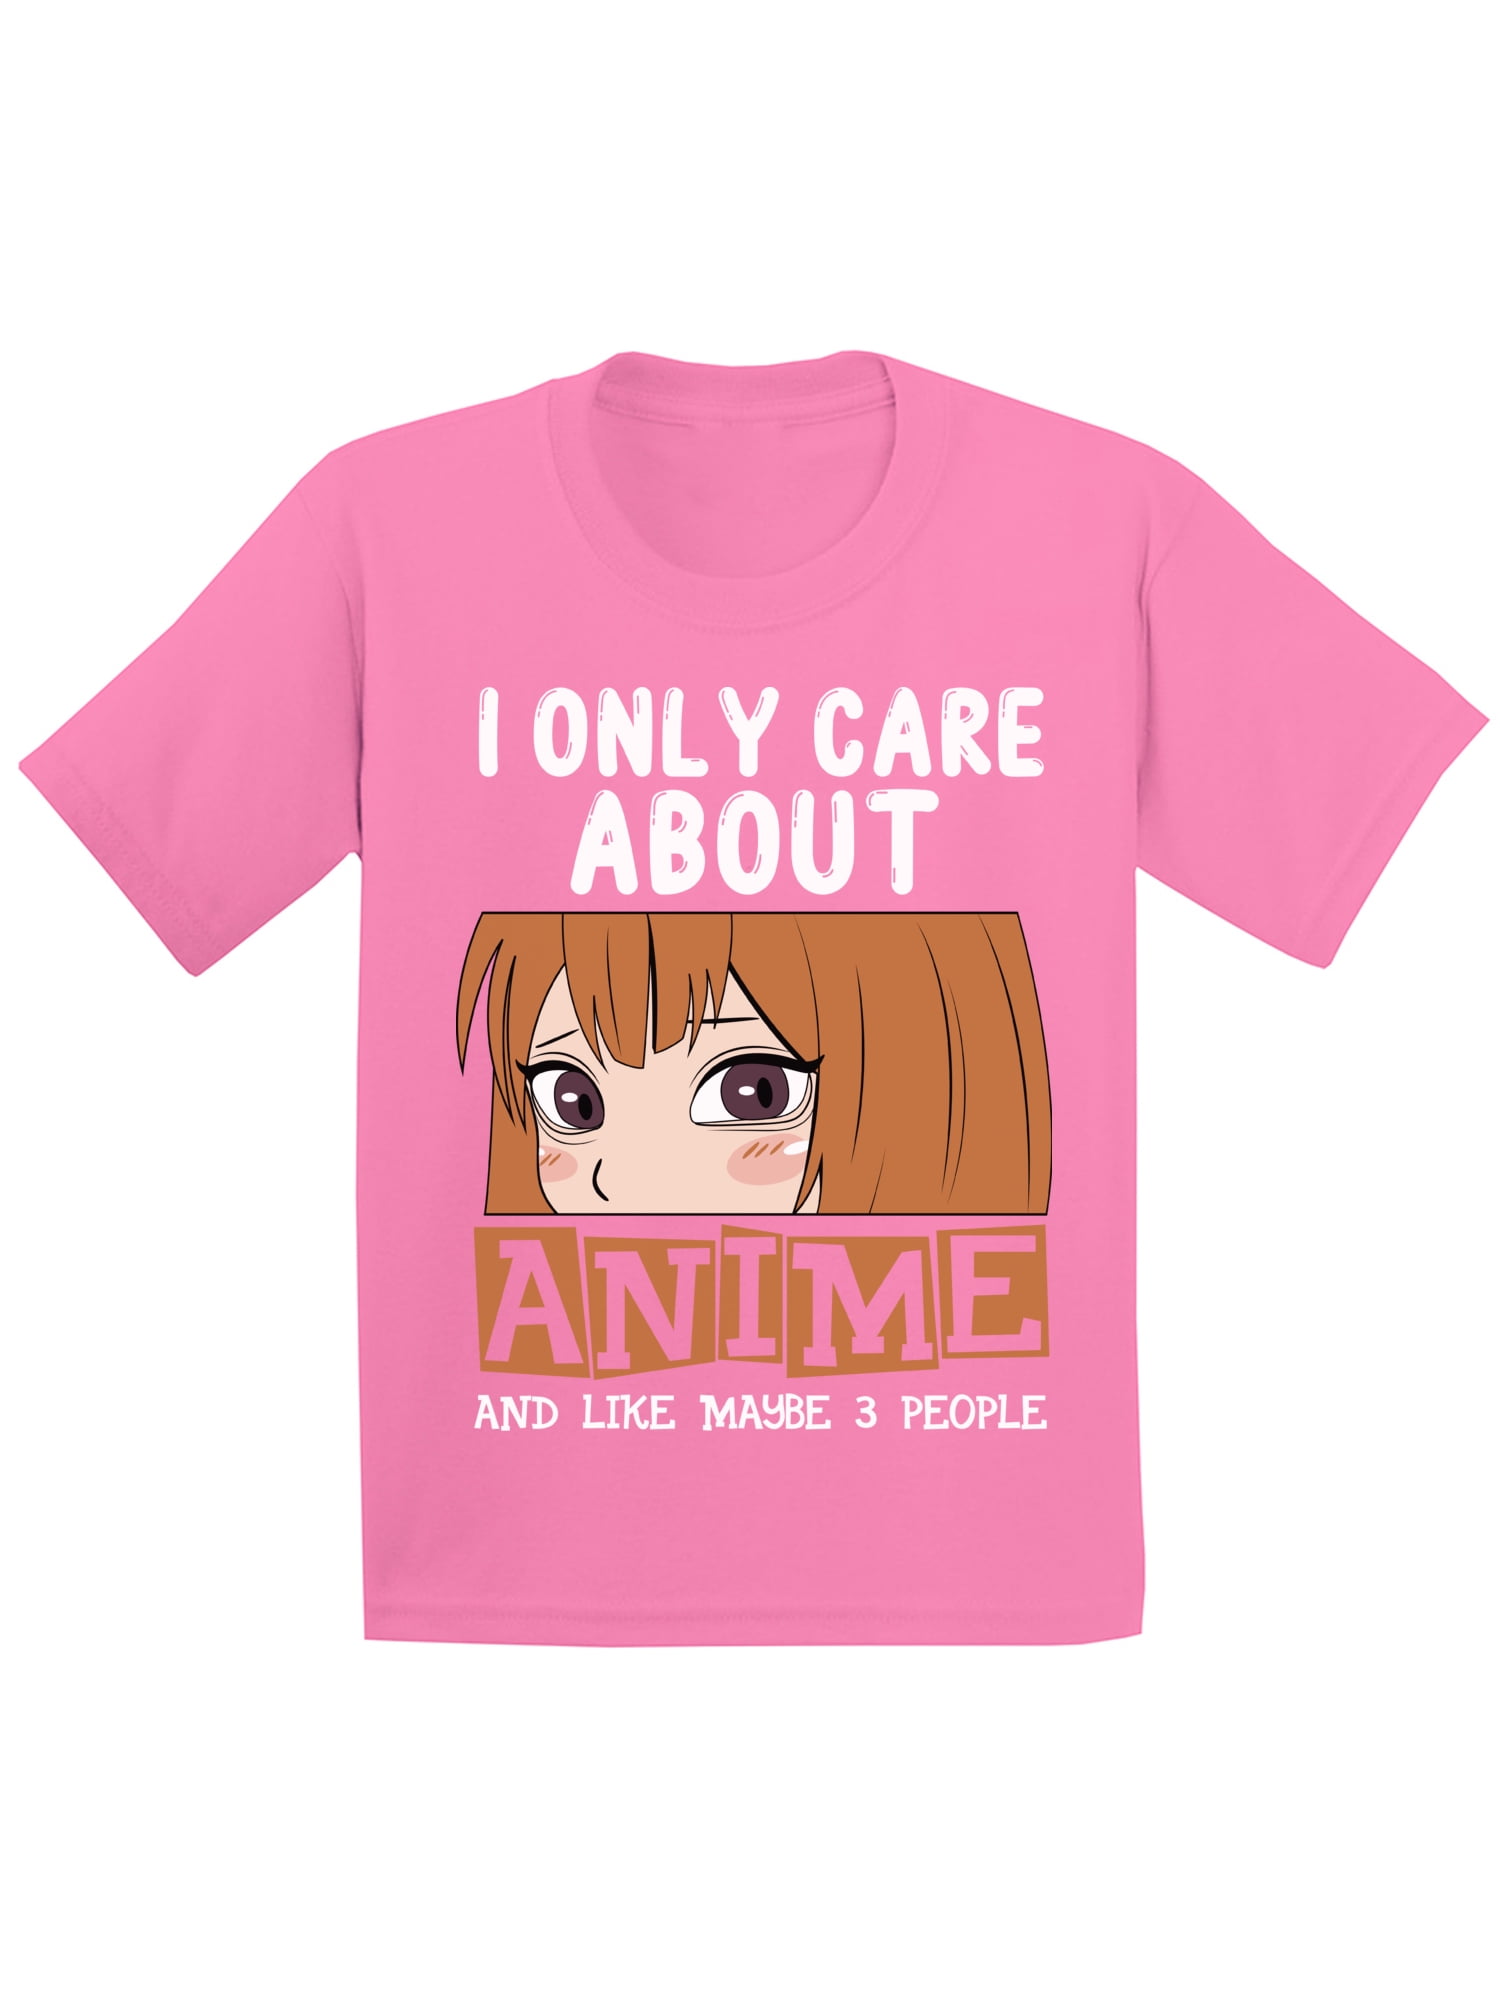 I Only Care About Anime T-Shirt for Kids Anime Boys Girls Tees Humor